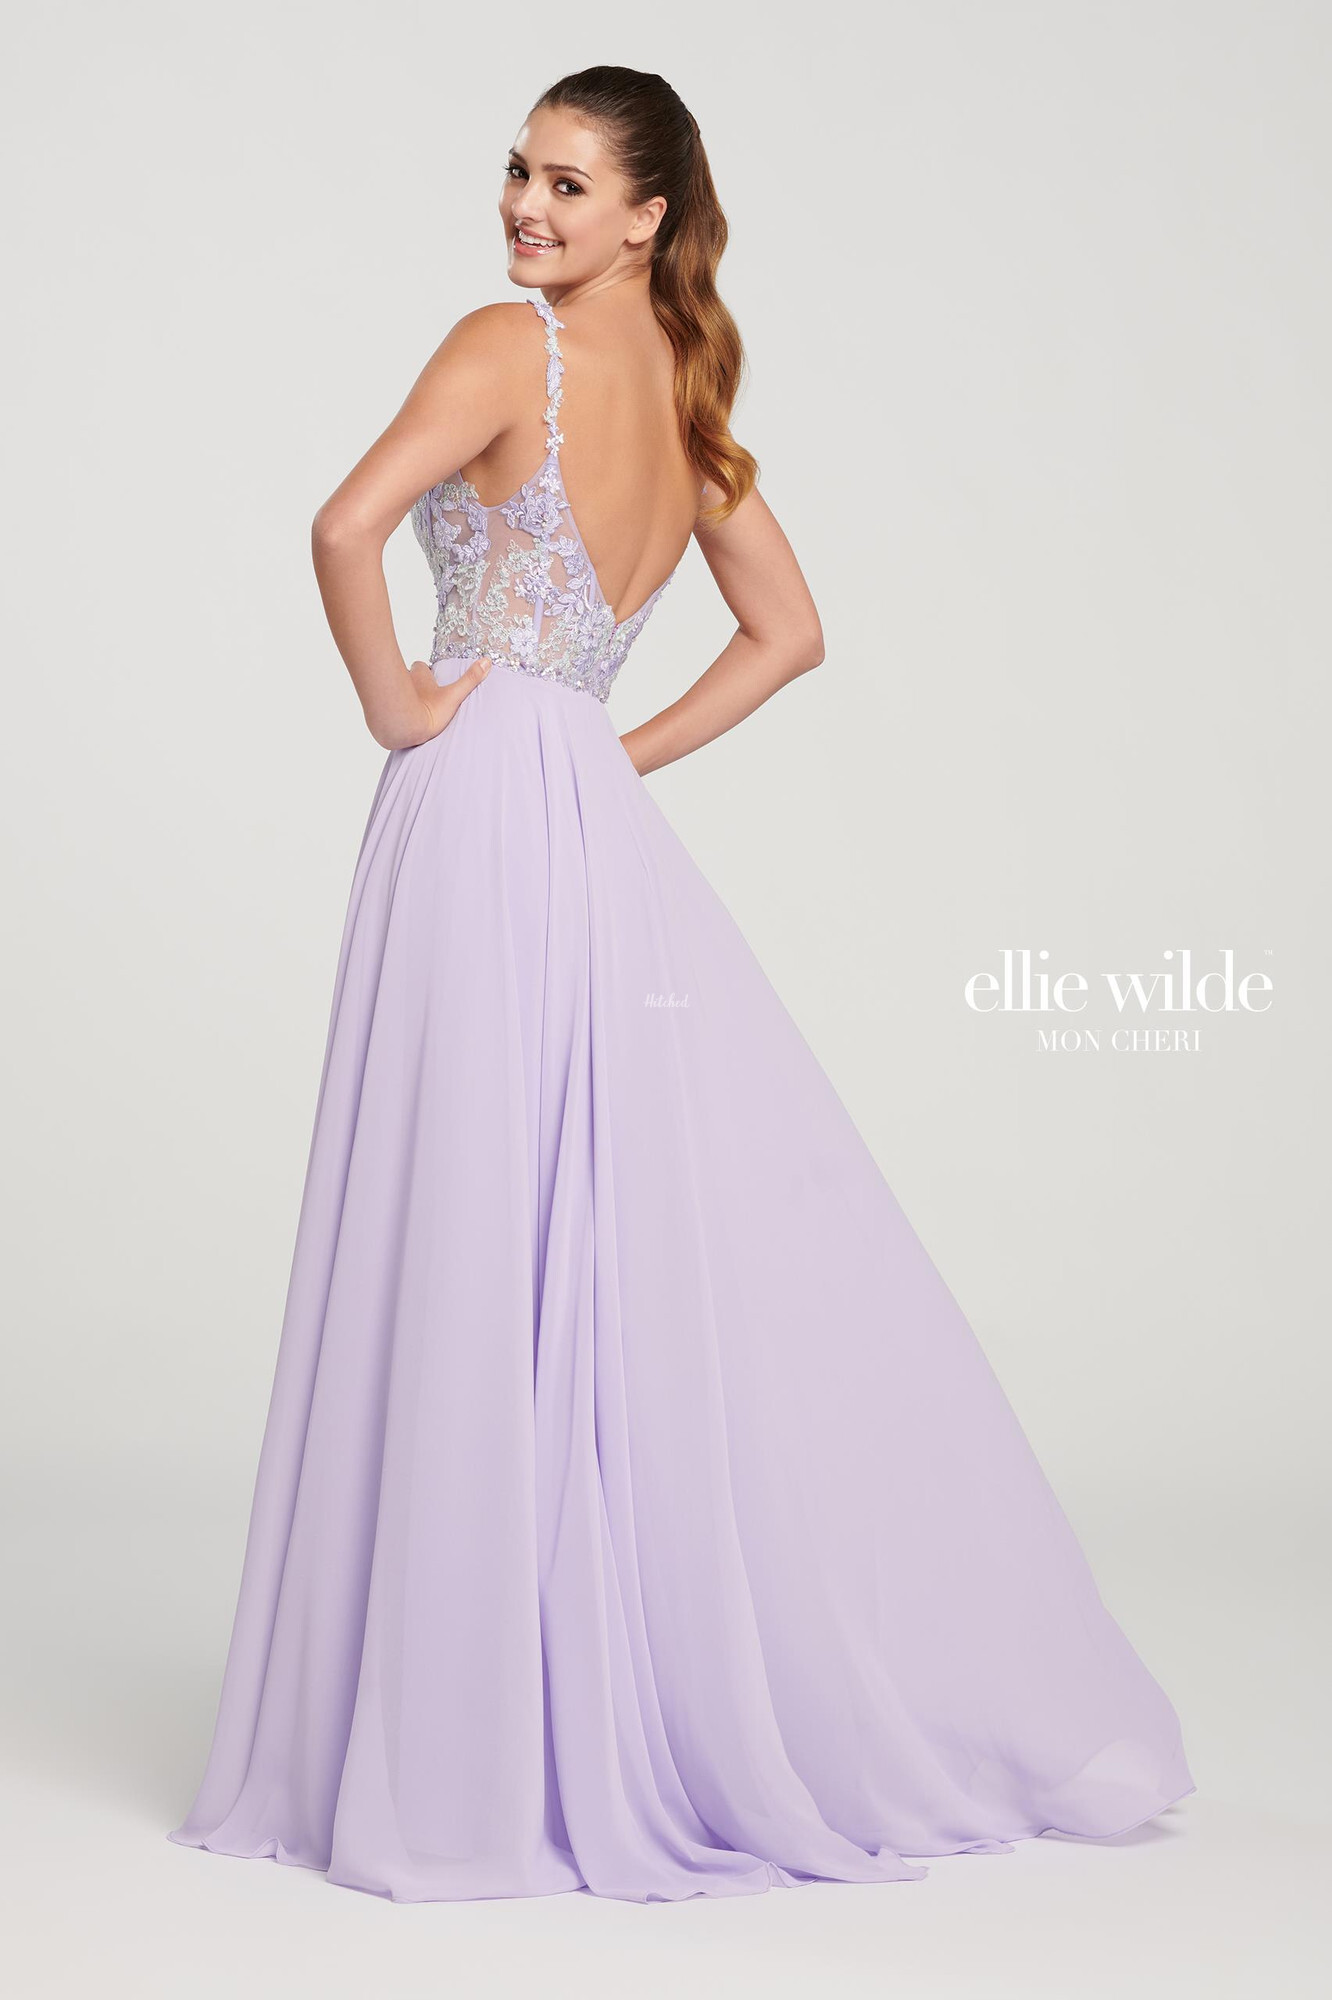 119135 Bridesmaid Dress from Ellie Wilde - hitched.co.uk